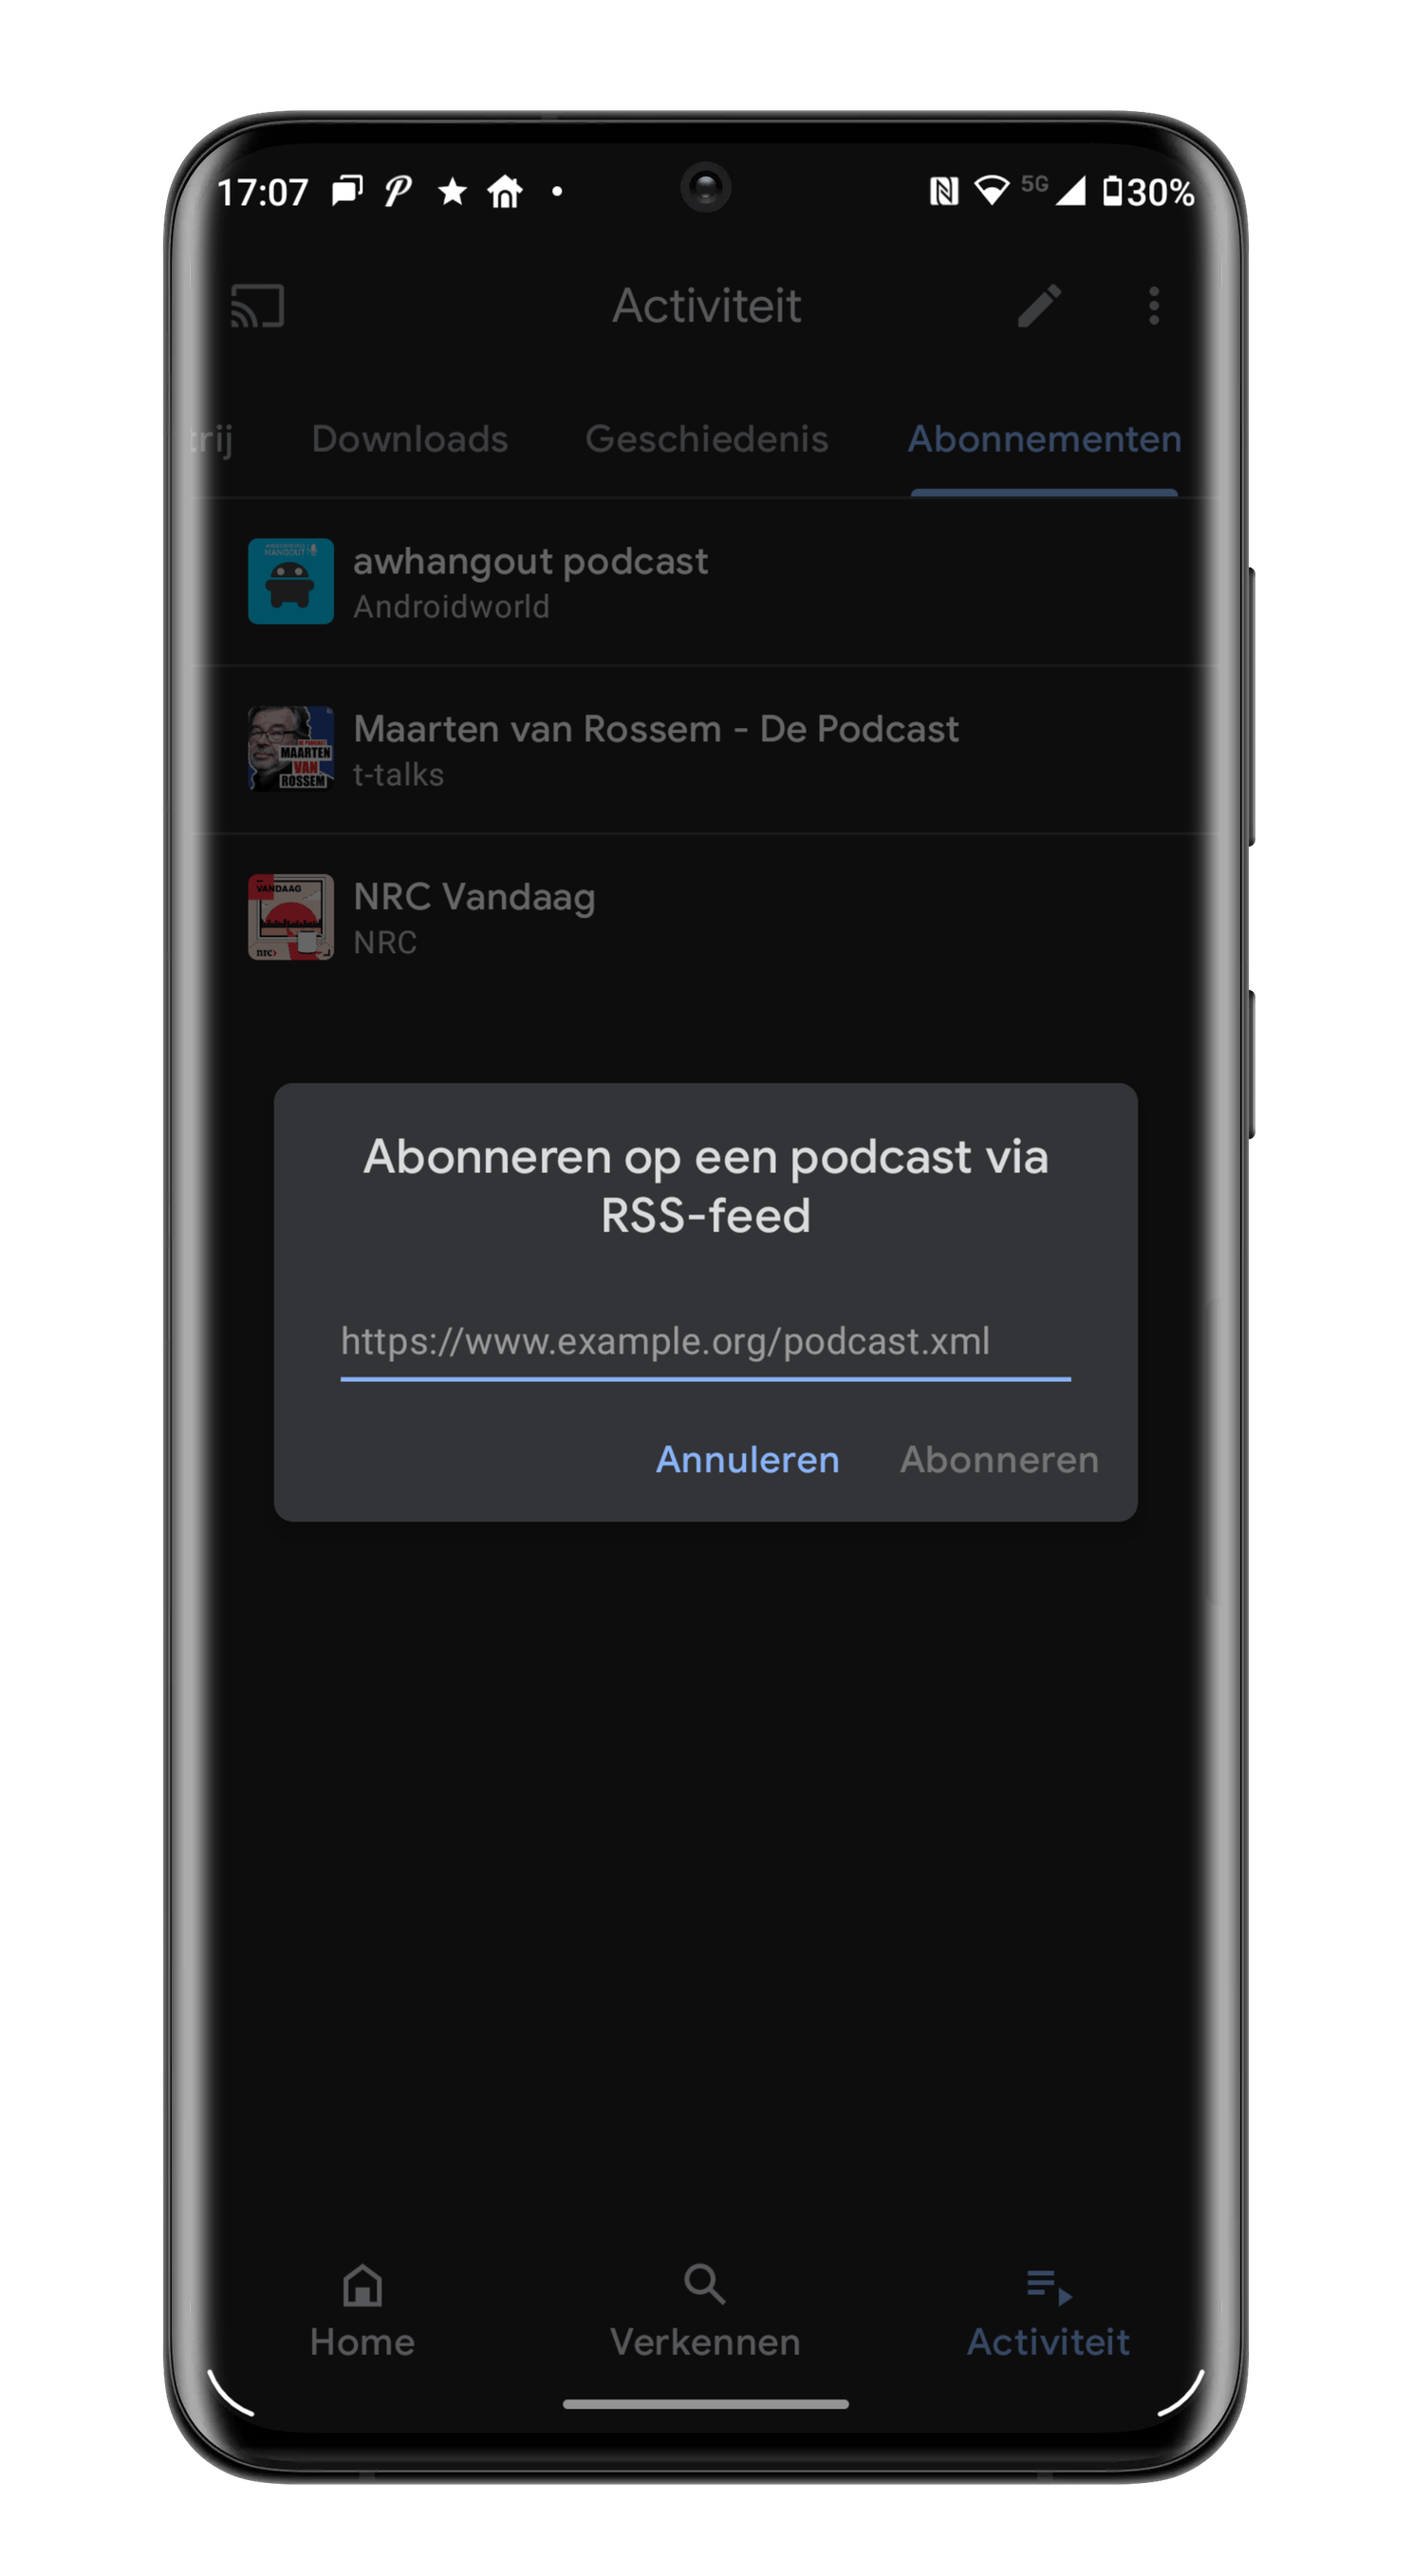 Listen to podcasts with Google Podcasts, all you need to know